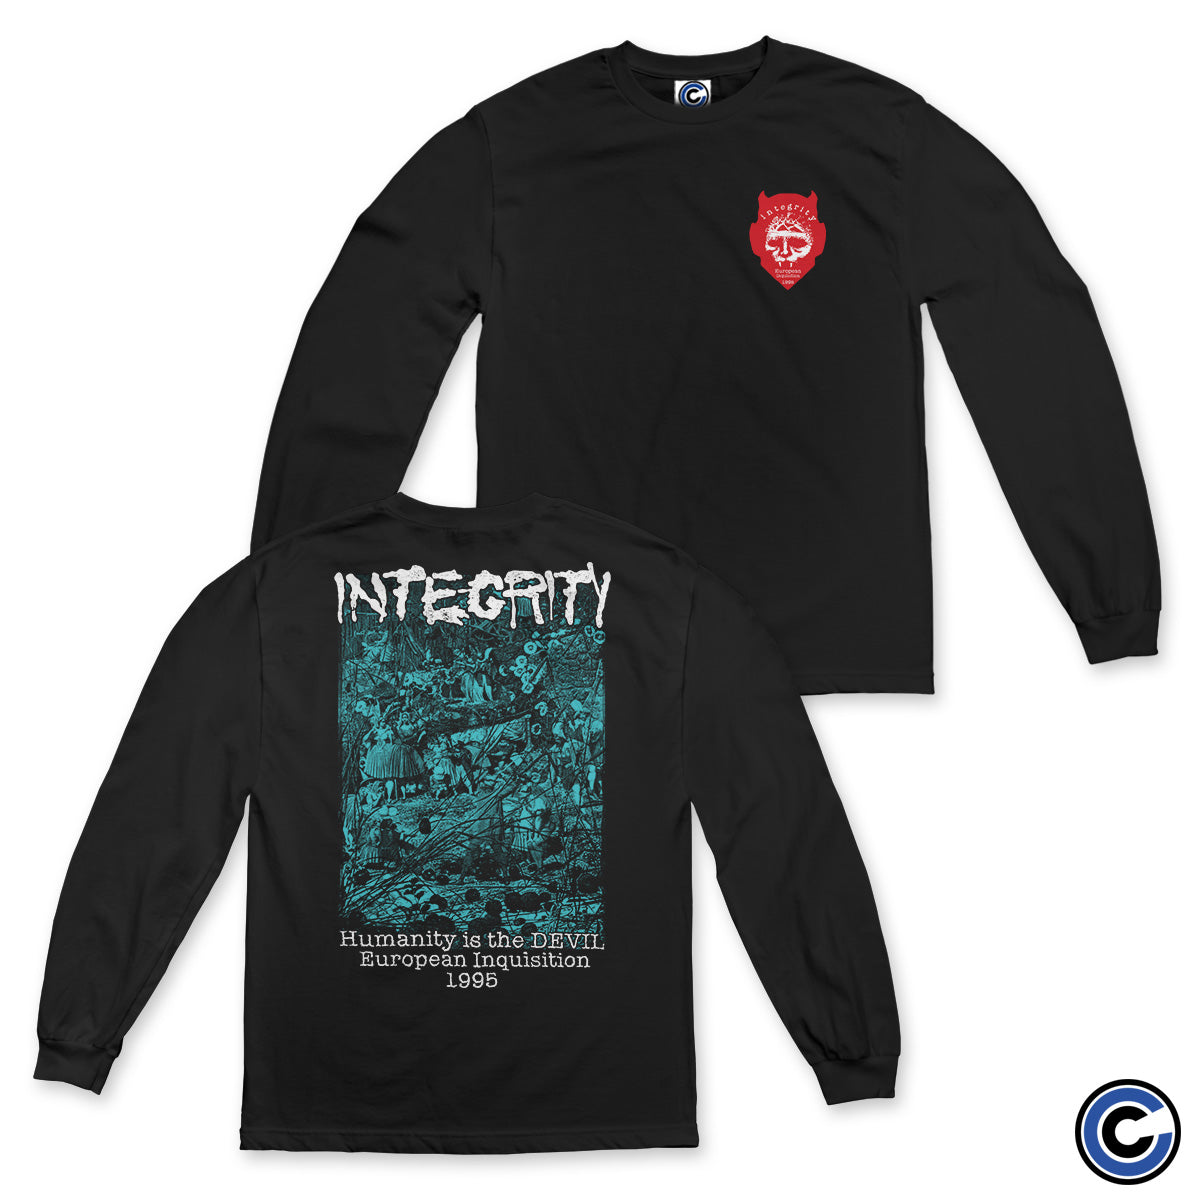 Integrity "European Inquisition" Long Sleeve